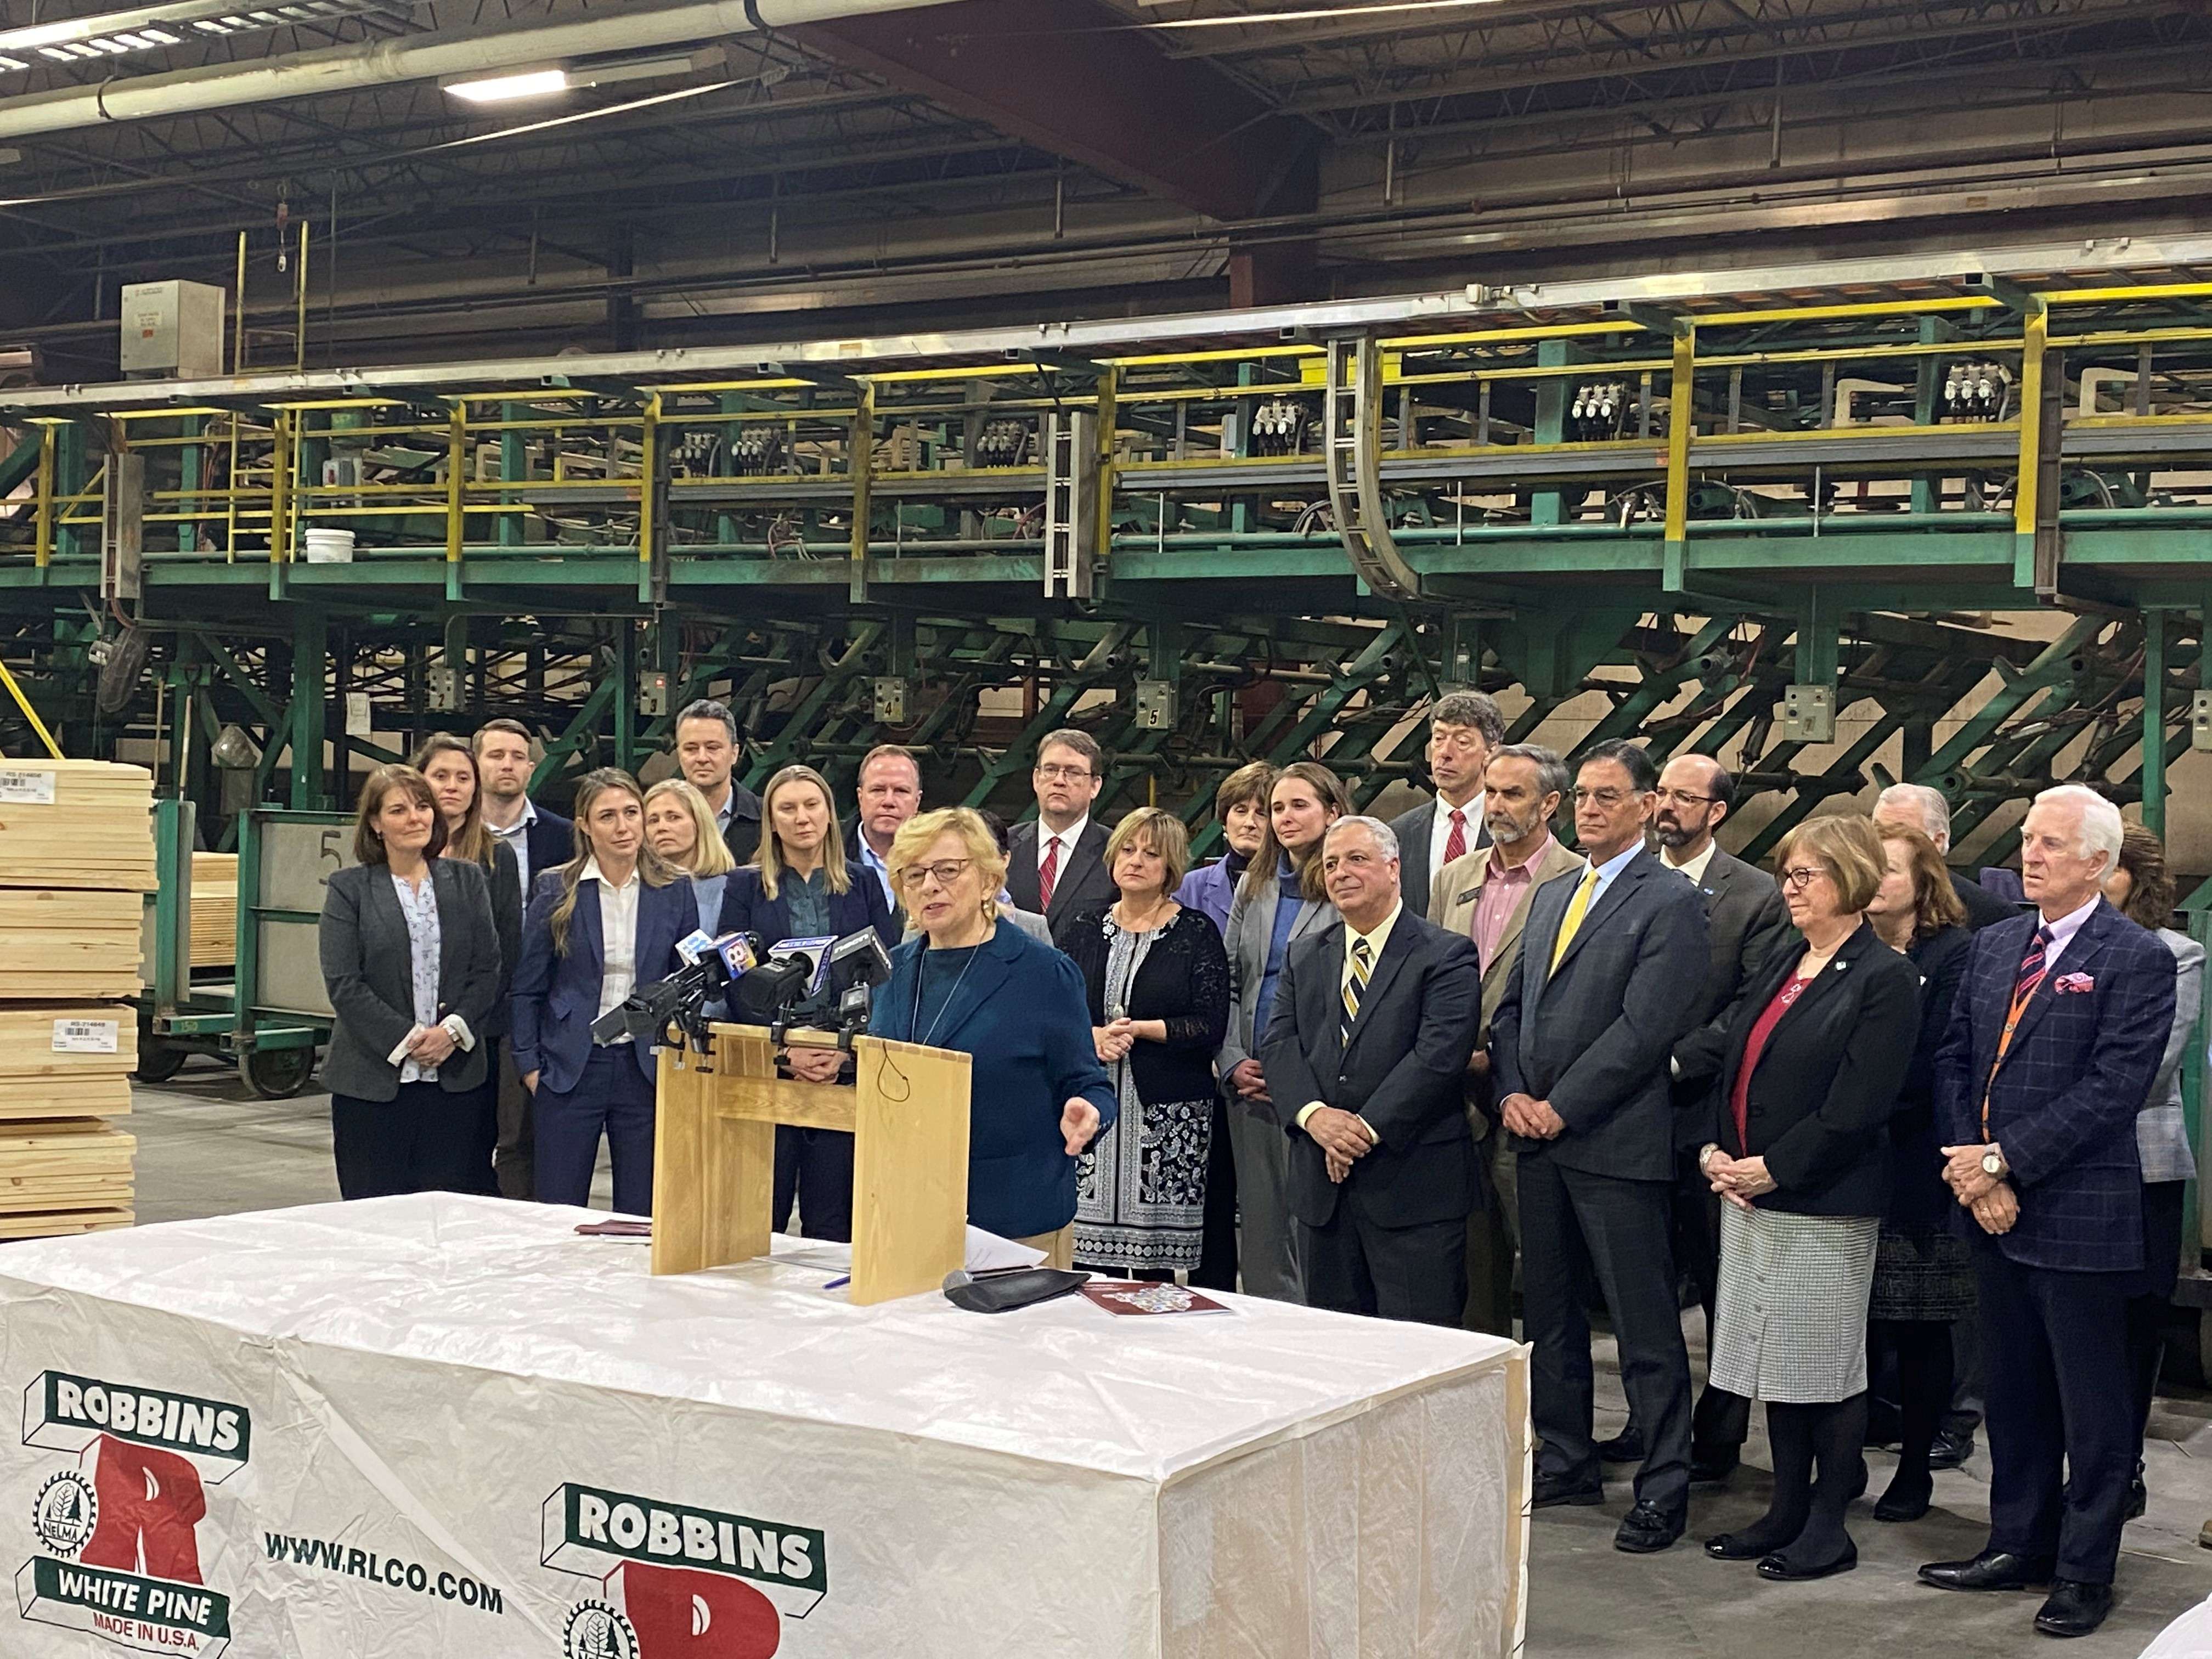 A woman speaks at a lectern as a about 20 people in business suits stand behind her. They are in a manufacturing plant.